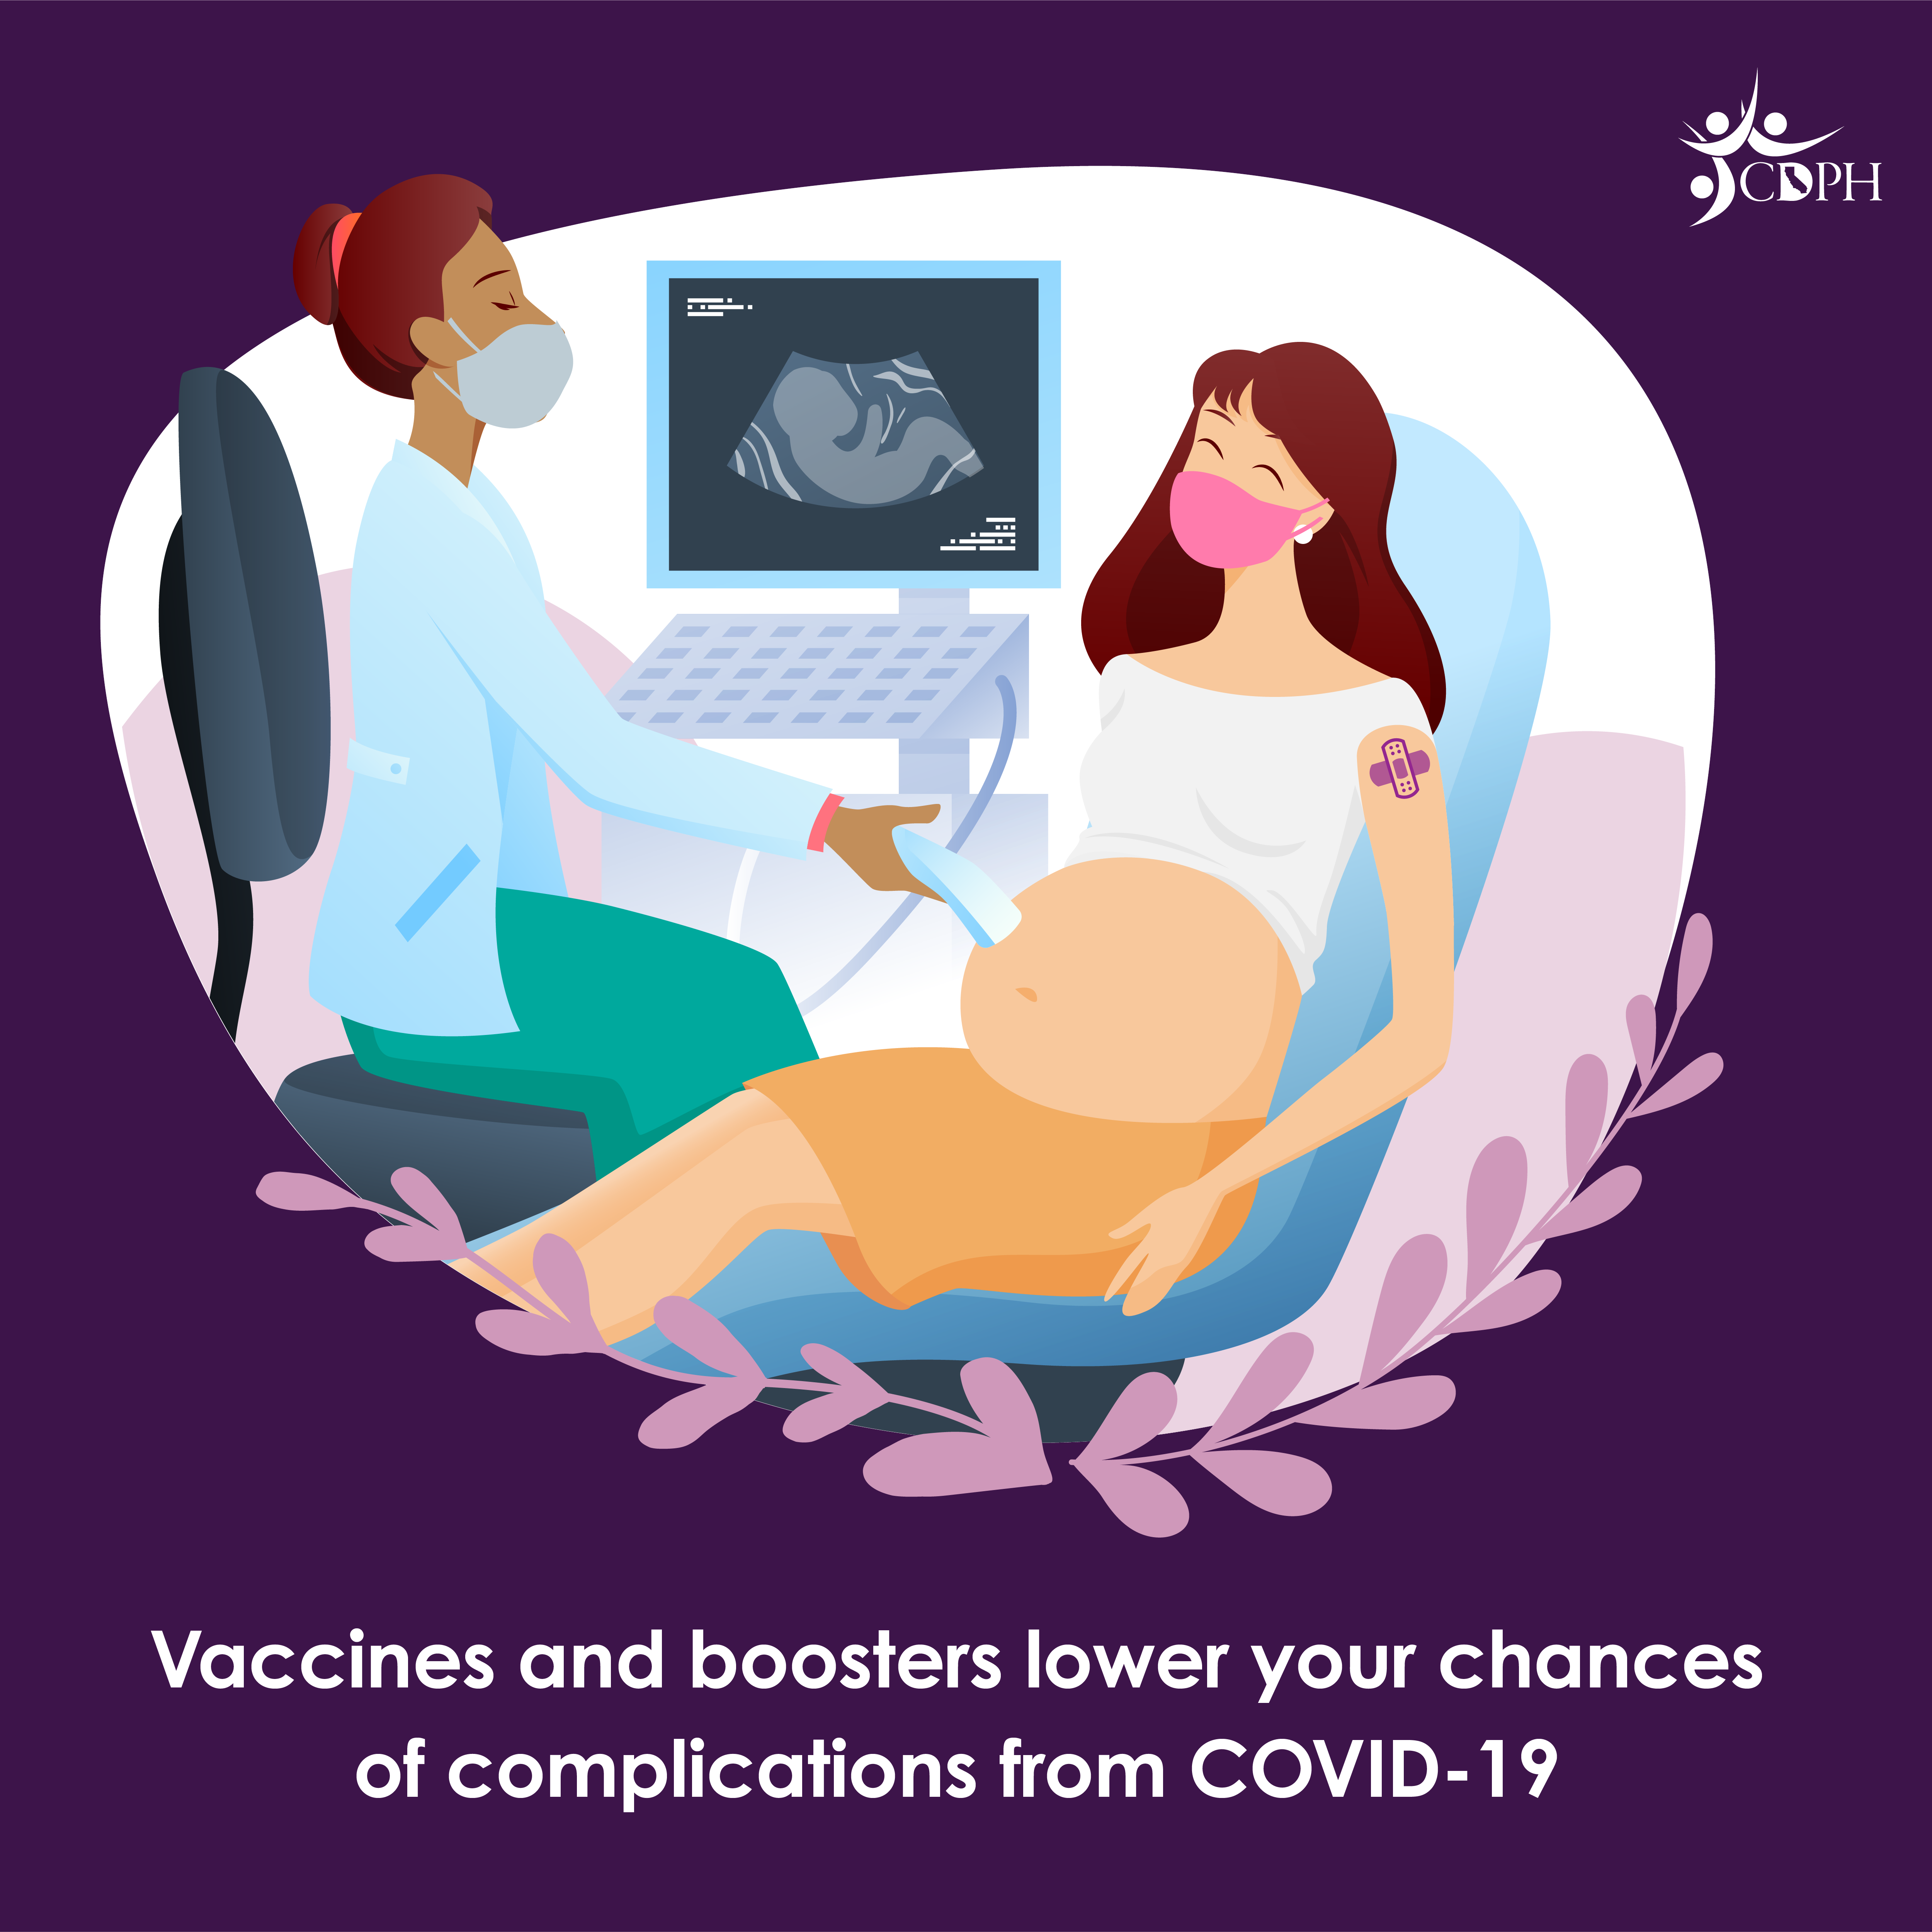 Vaccines and boosters lower your chances of complications from COVID-19